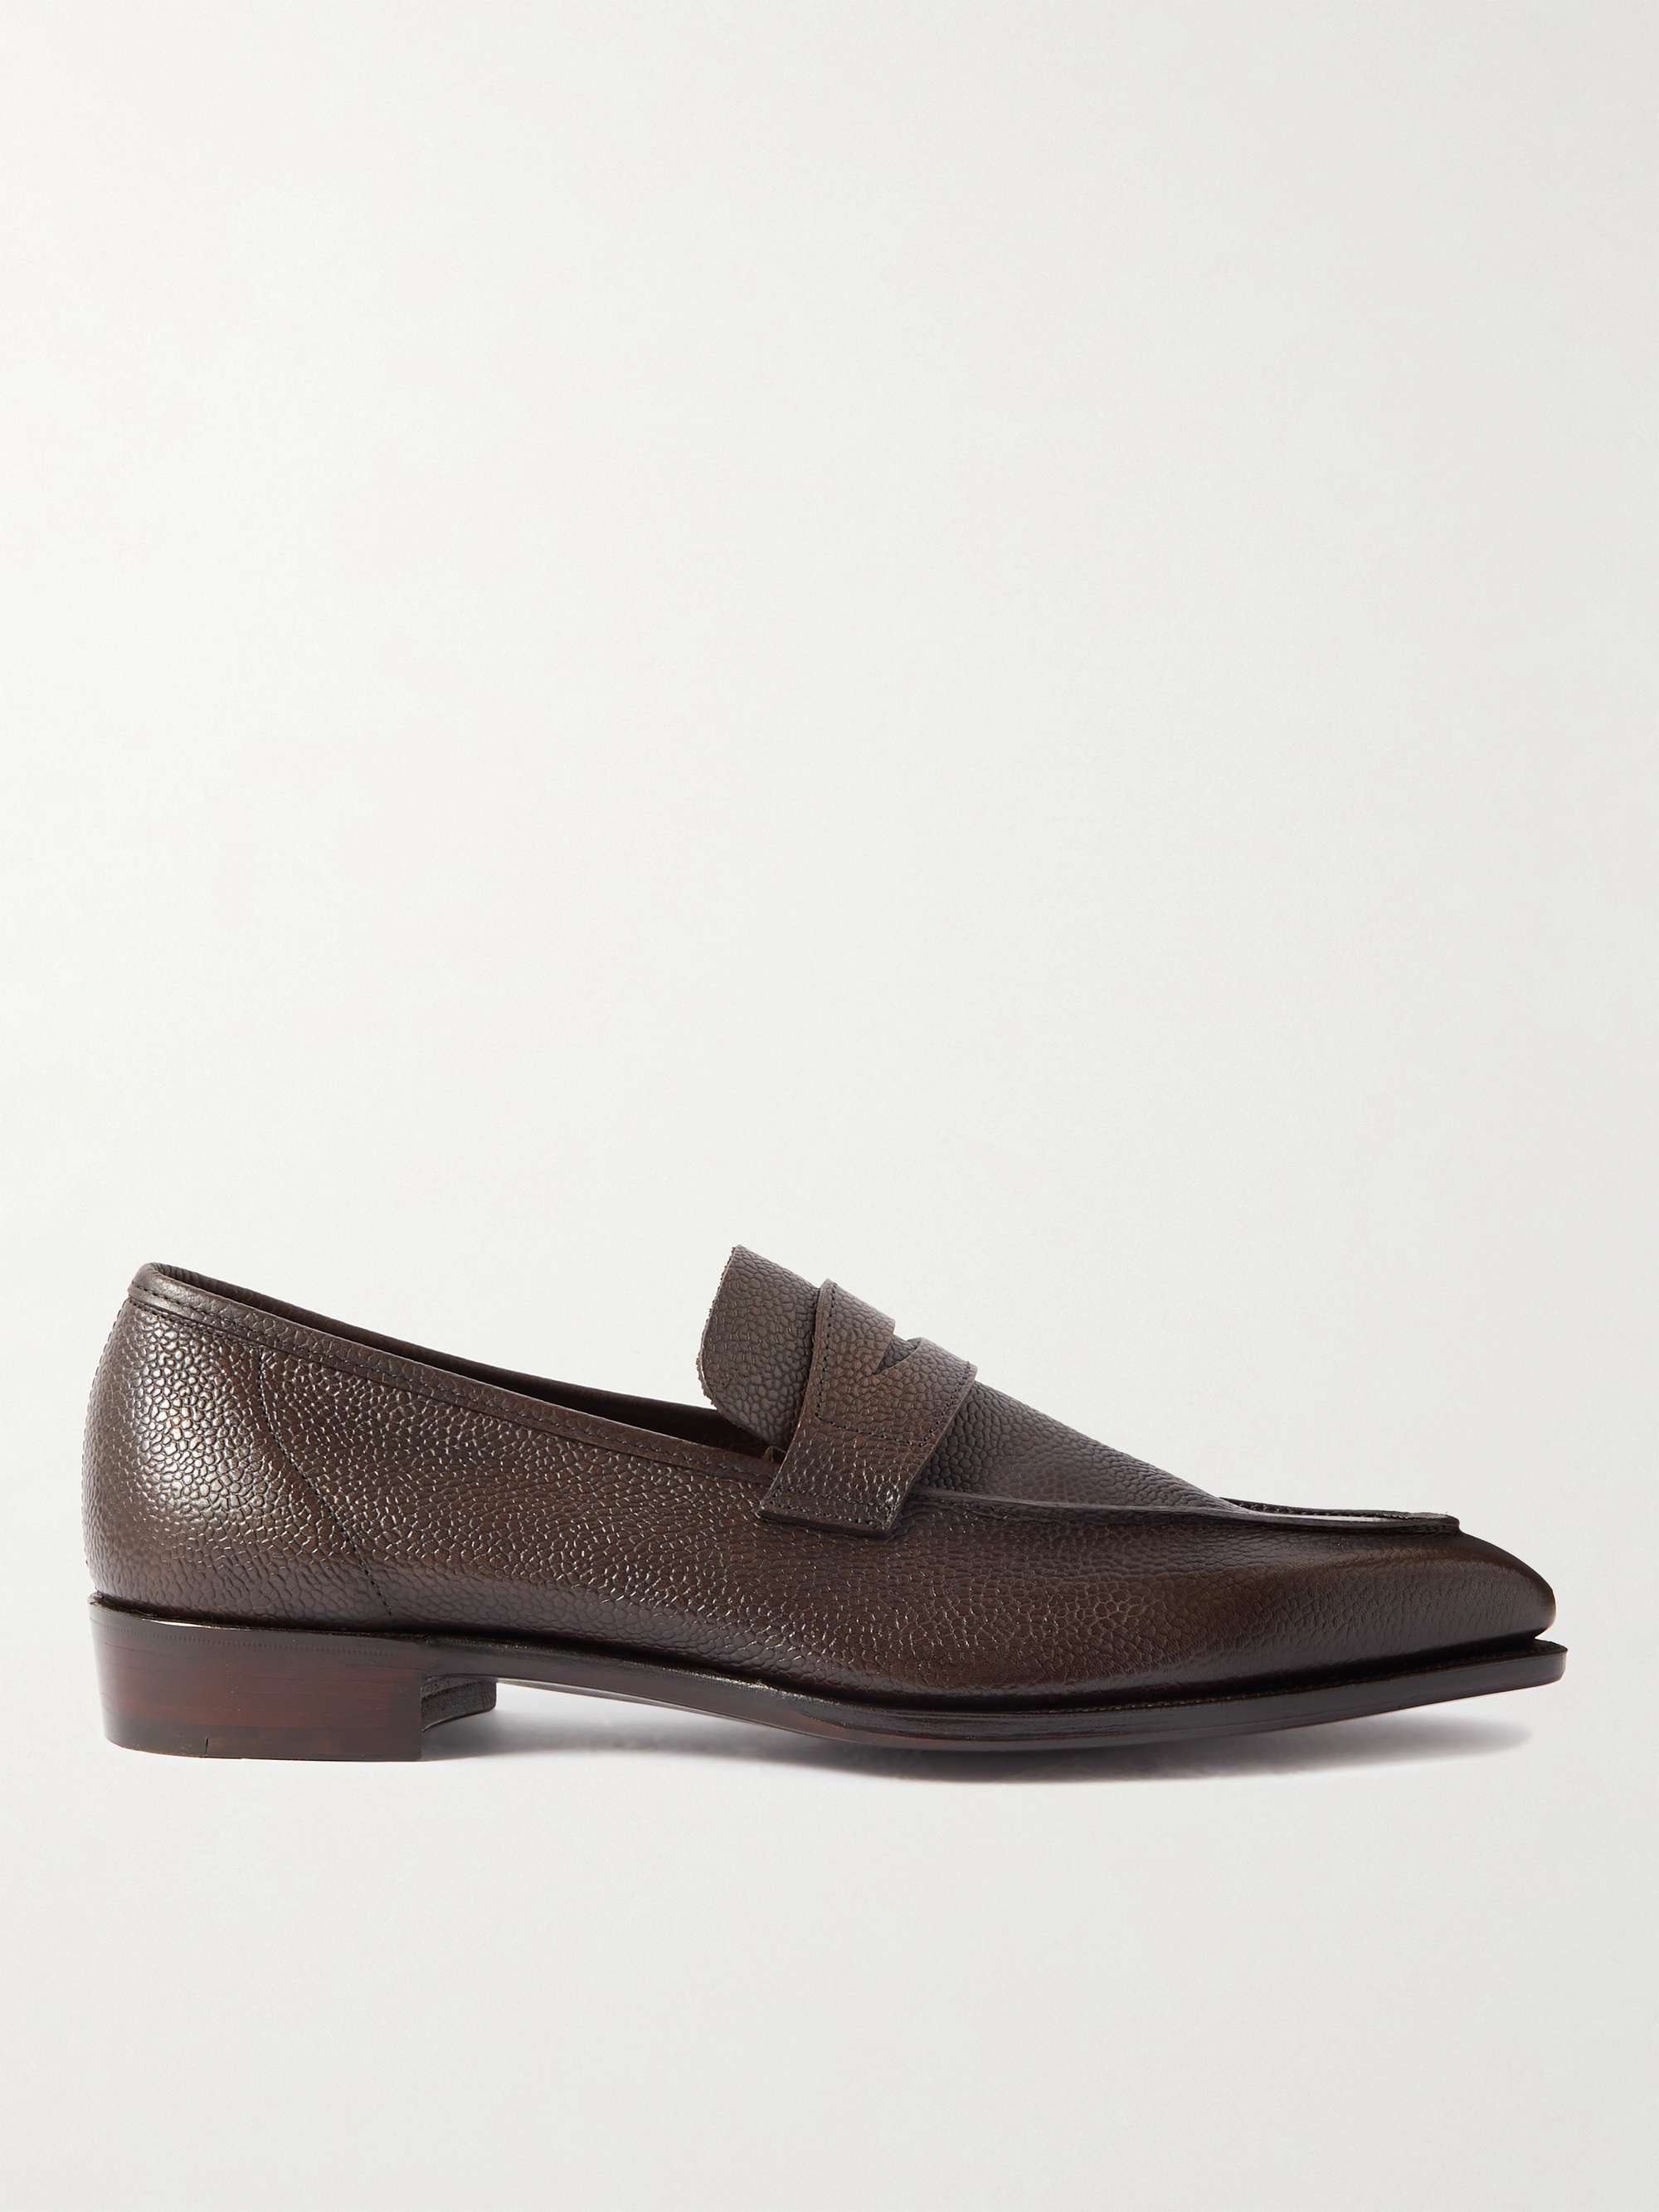 GEORGE CLEVERLEY Suede Penny Loafers